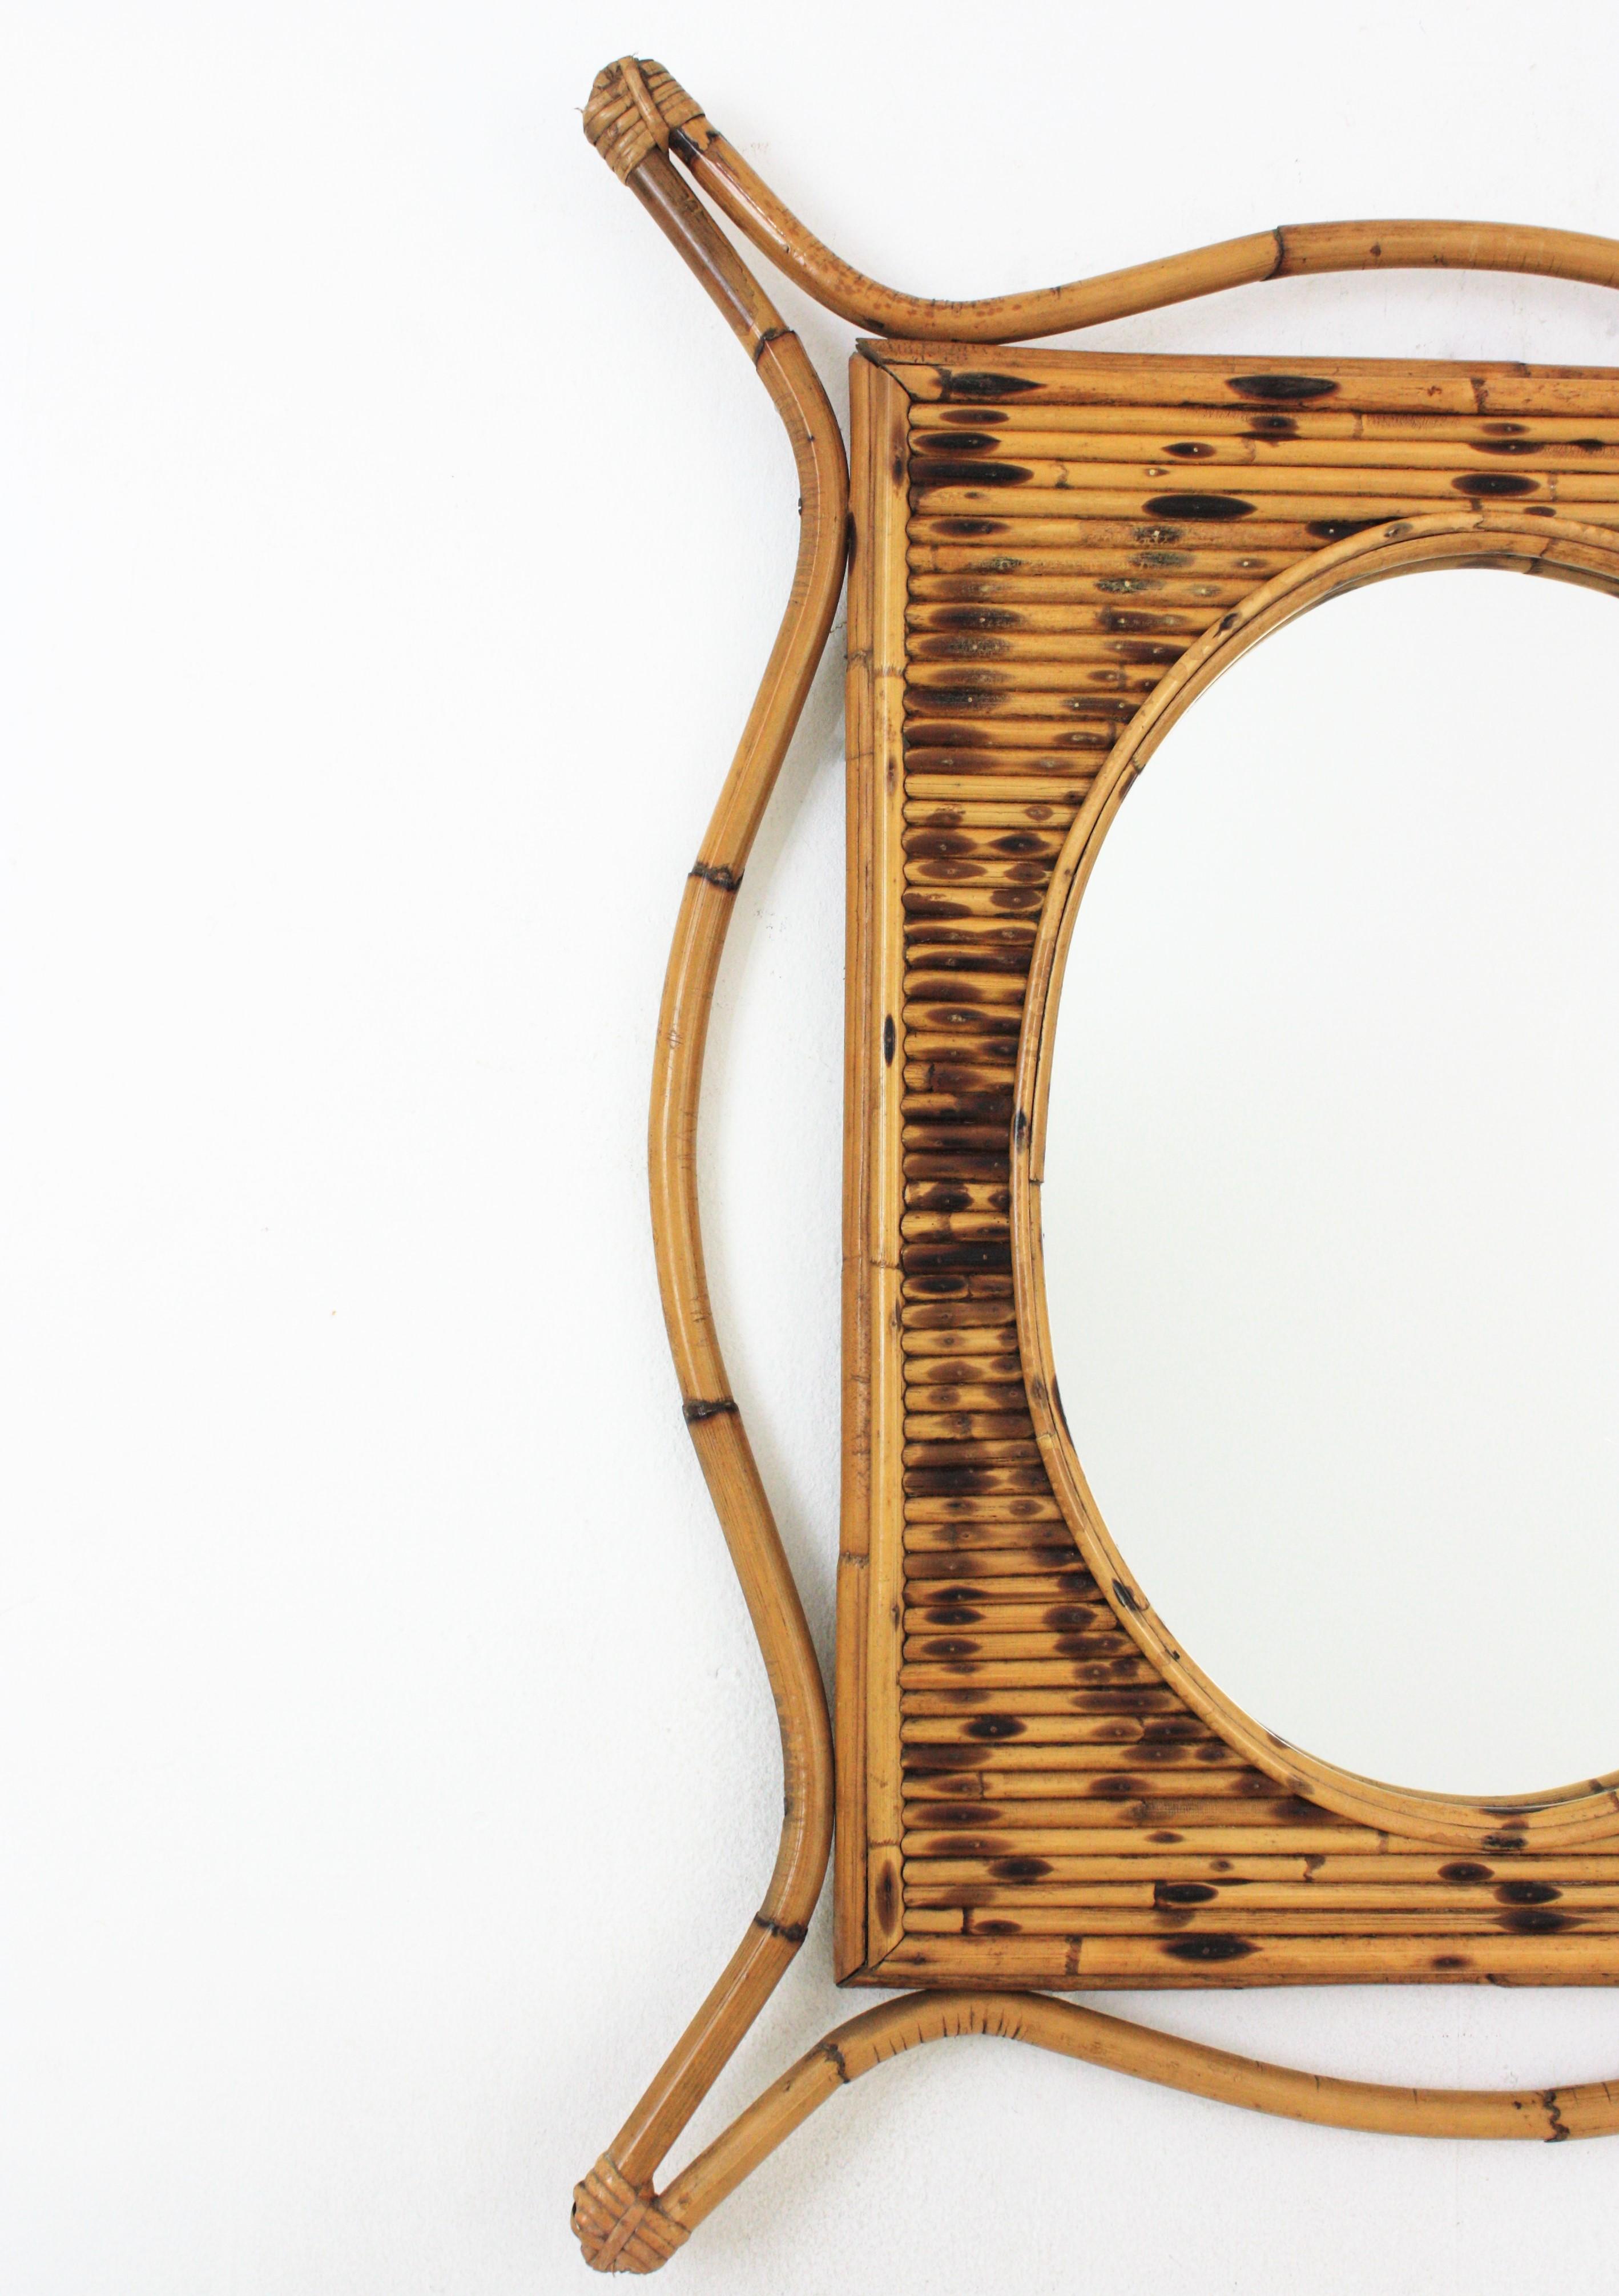 Spanish Rattan Bamboo Large Mirror with Split Reed Details, Spain, 1960s0s For Sale